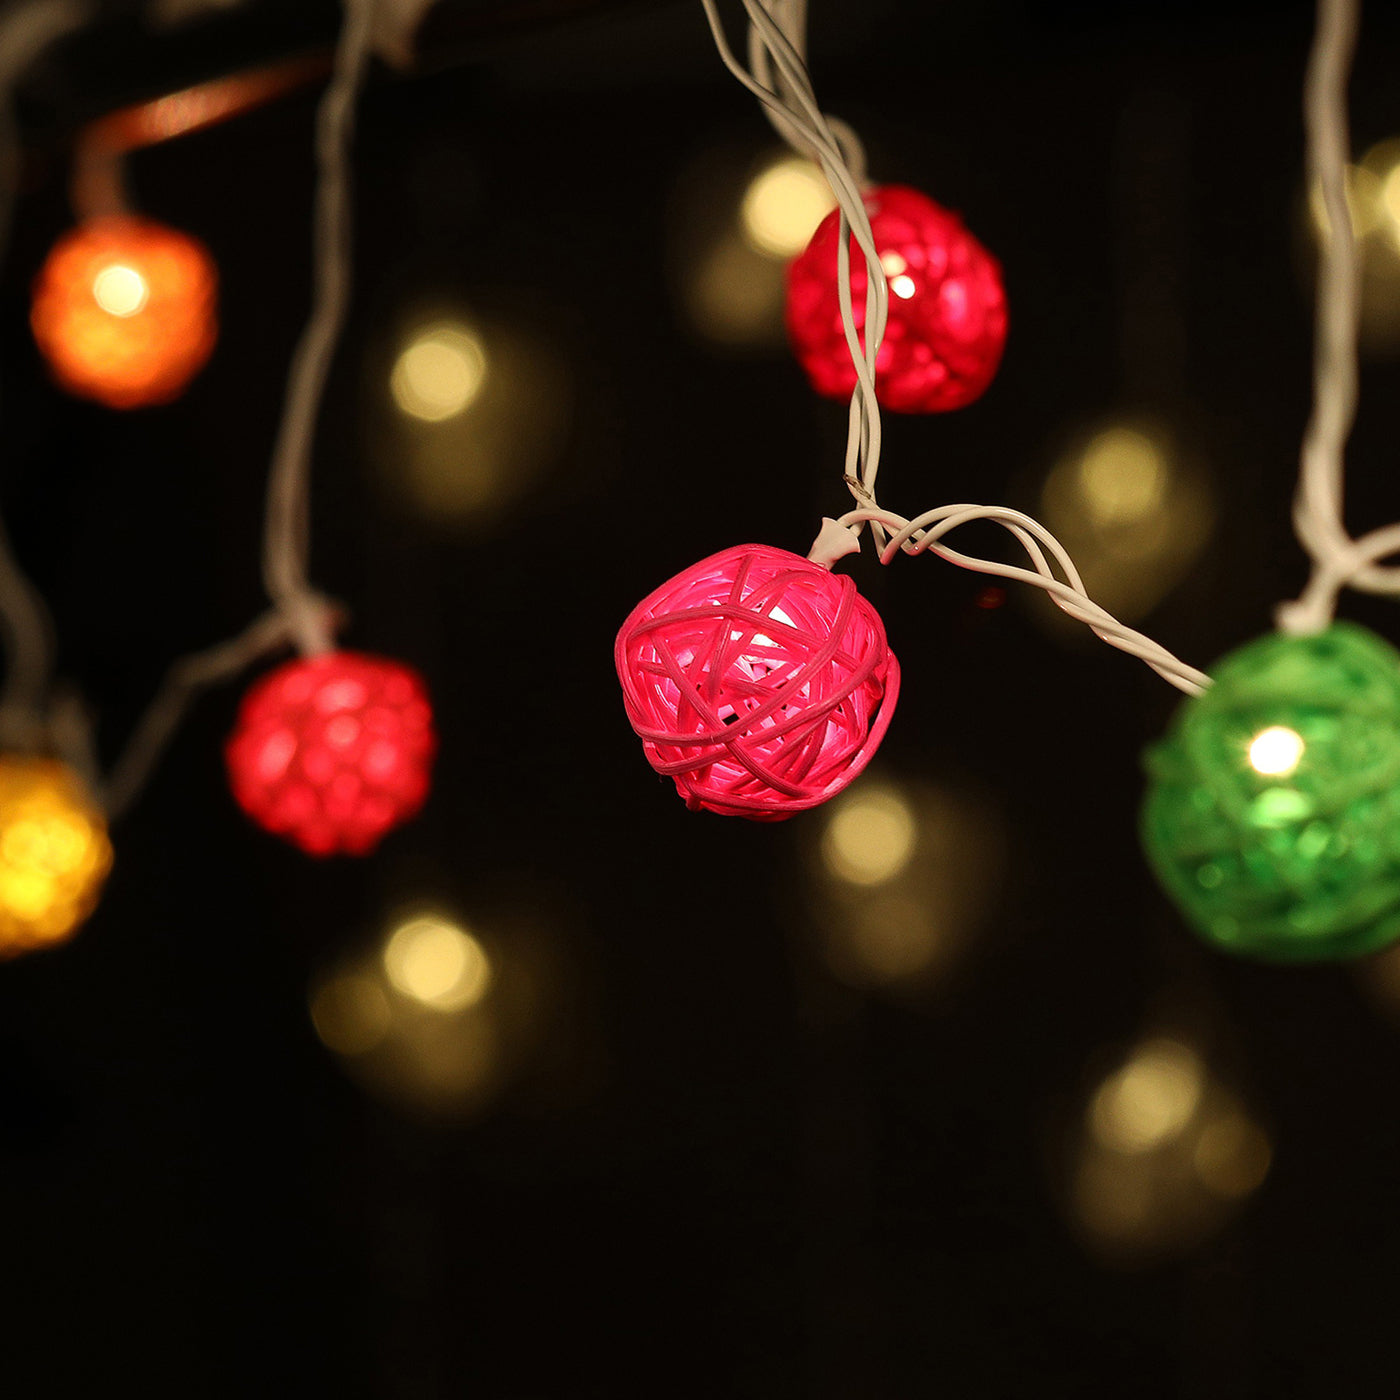 DecorTwist LED Wire Ball for Home and Office Decor| Indoor & Outdoor Decorative Lights|Christmas |Diwali |Wedding | Christmas | Diwali | Wedding | 3.05 MTR